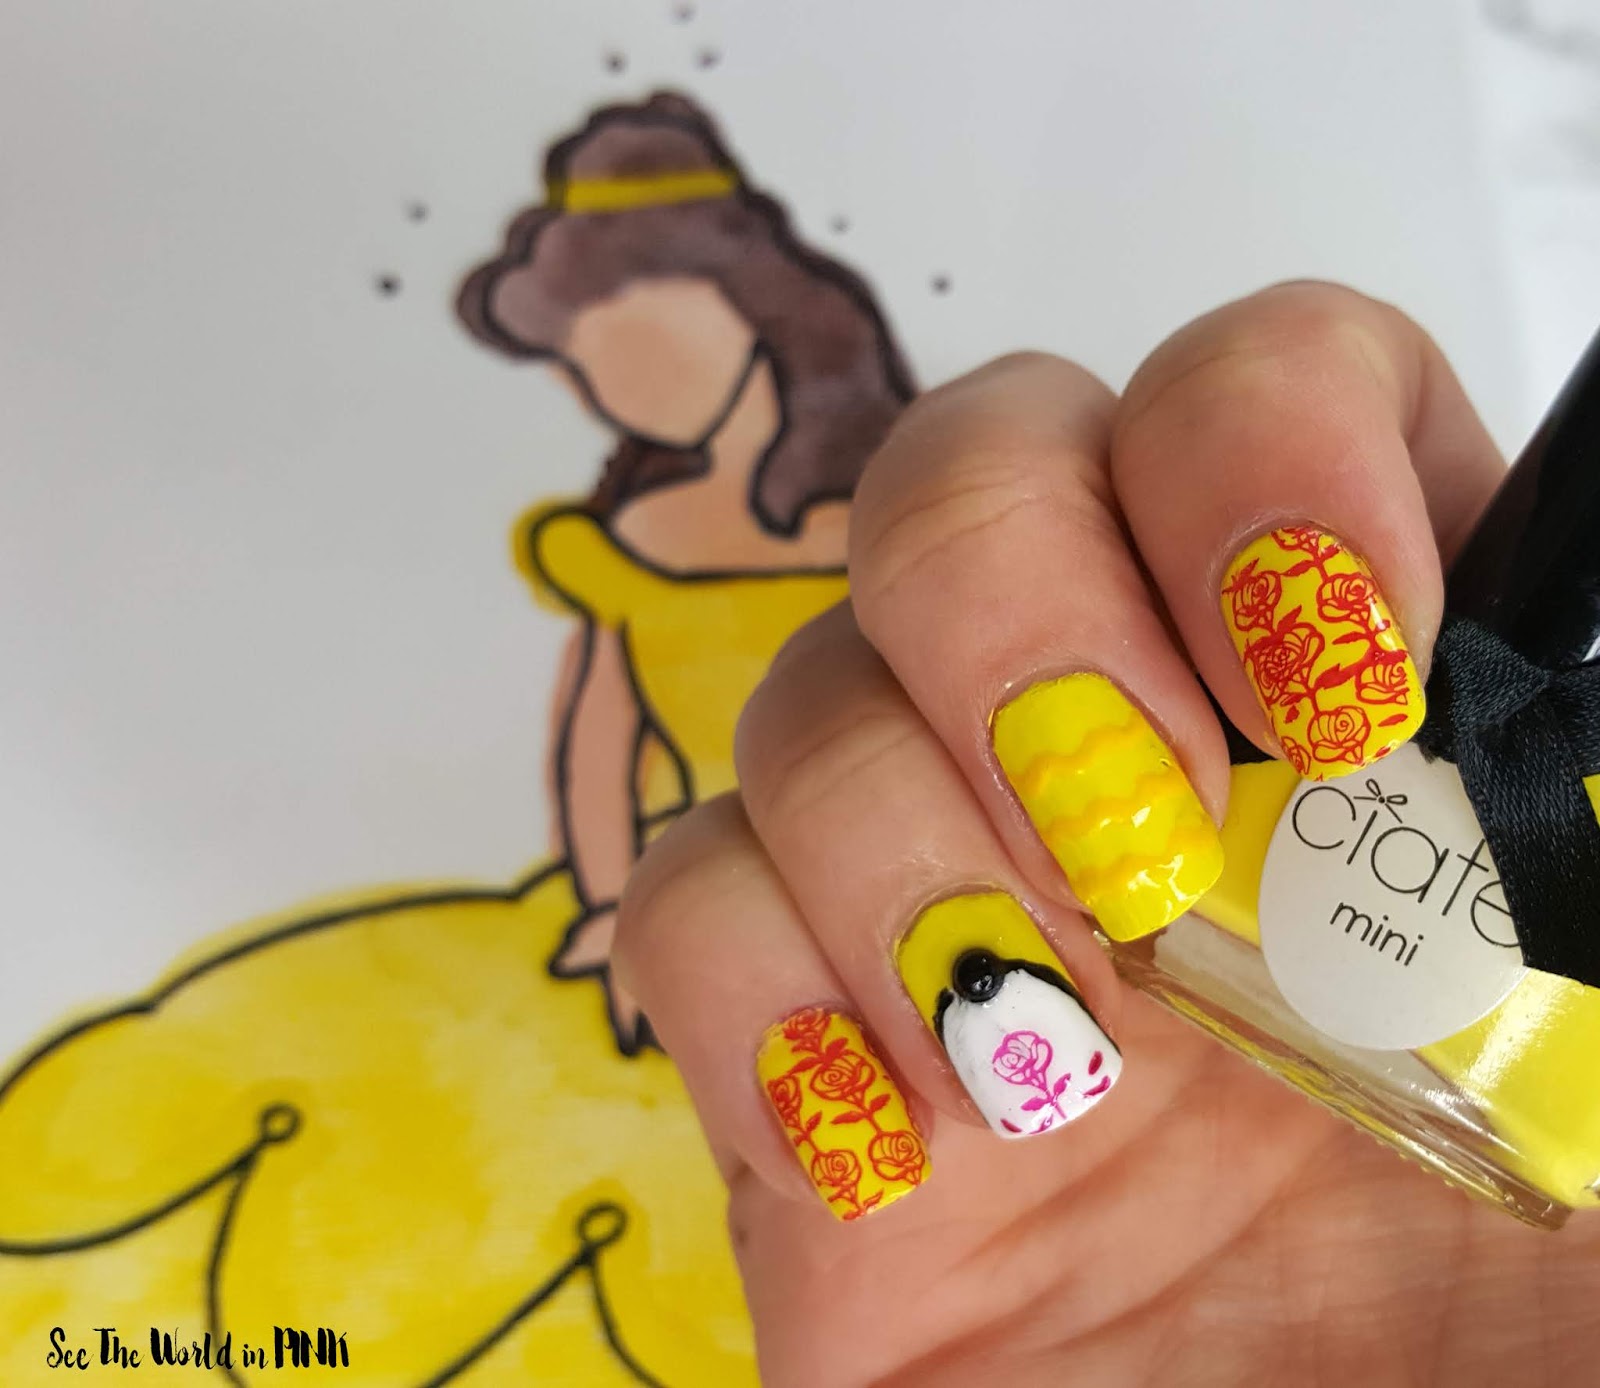 Manicure Monday "Inspired By" Beauty and the Beast ~ Stamping and Nail Art